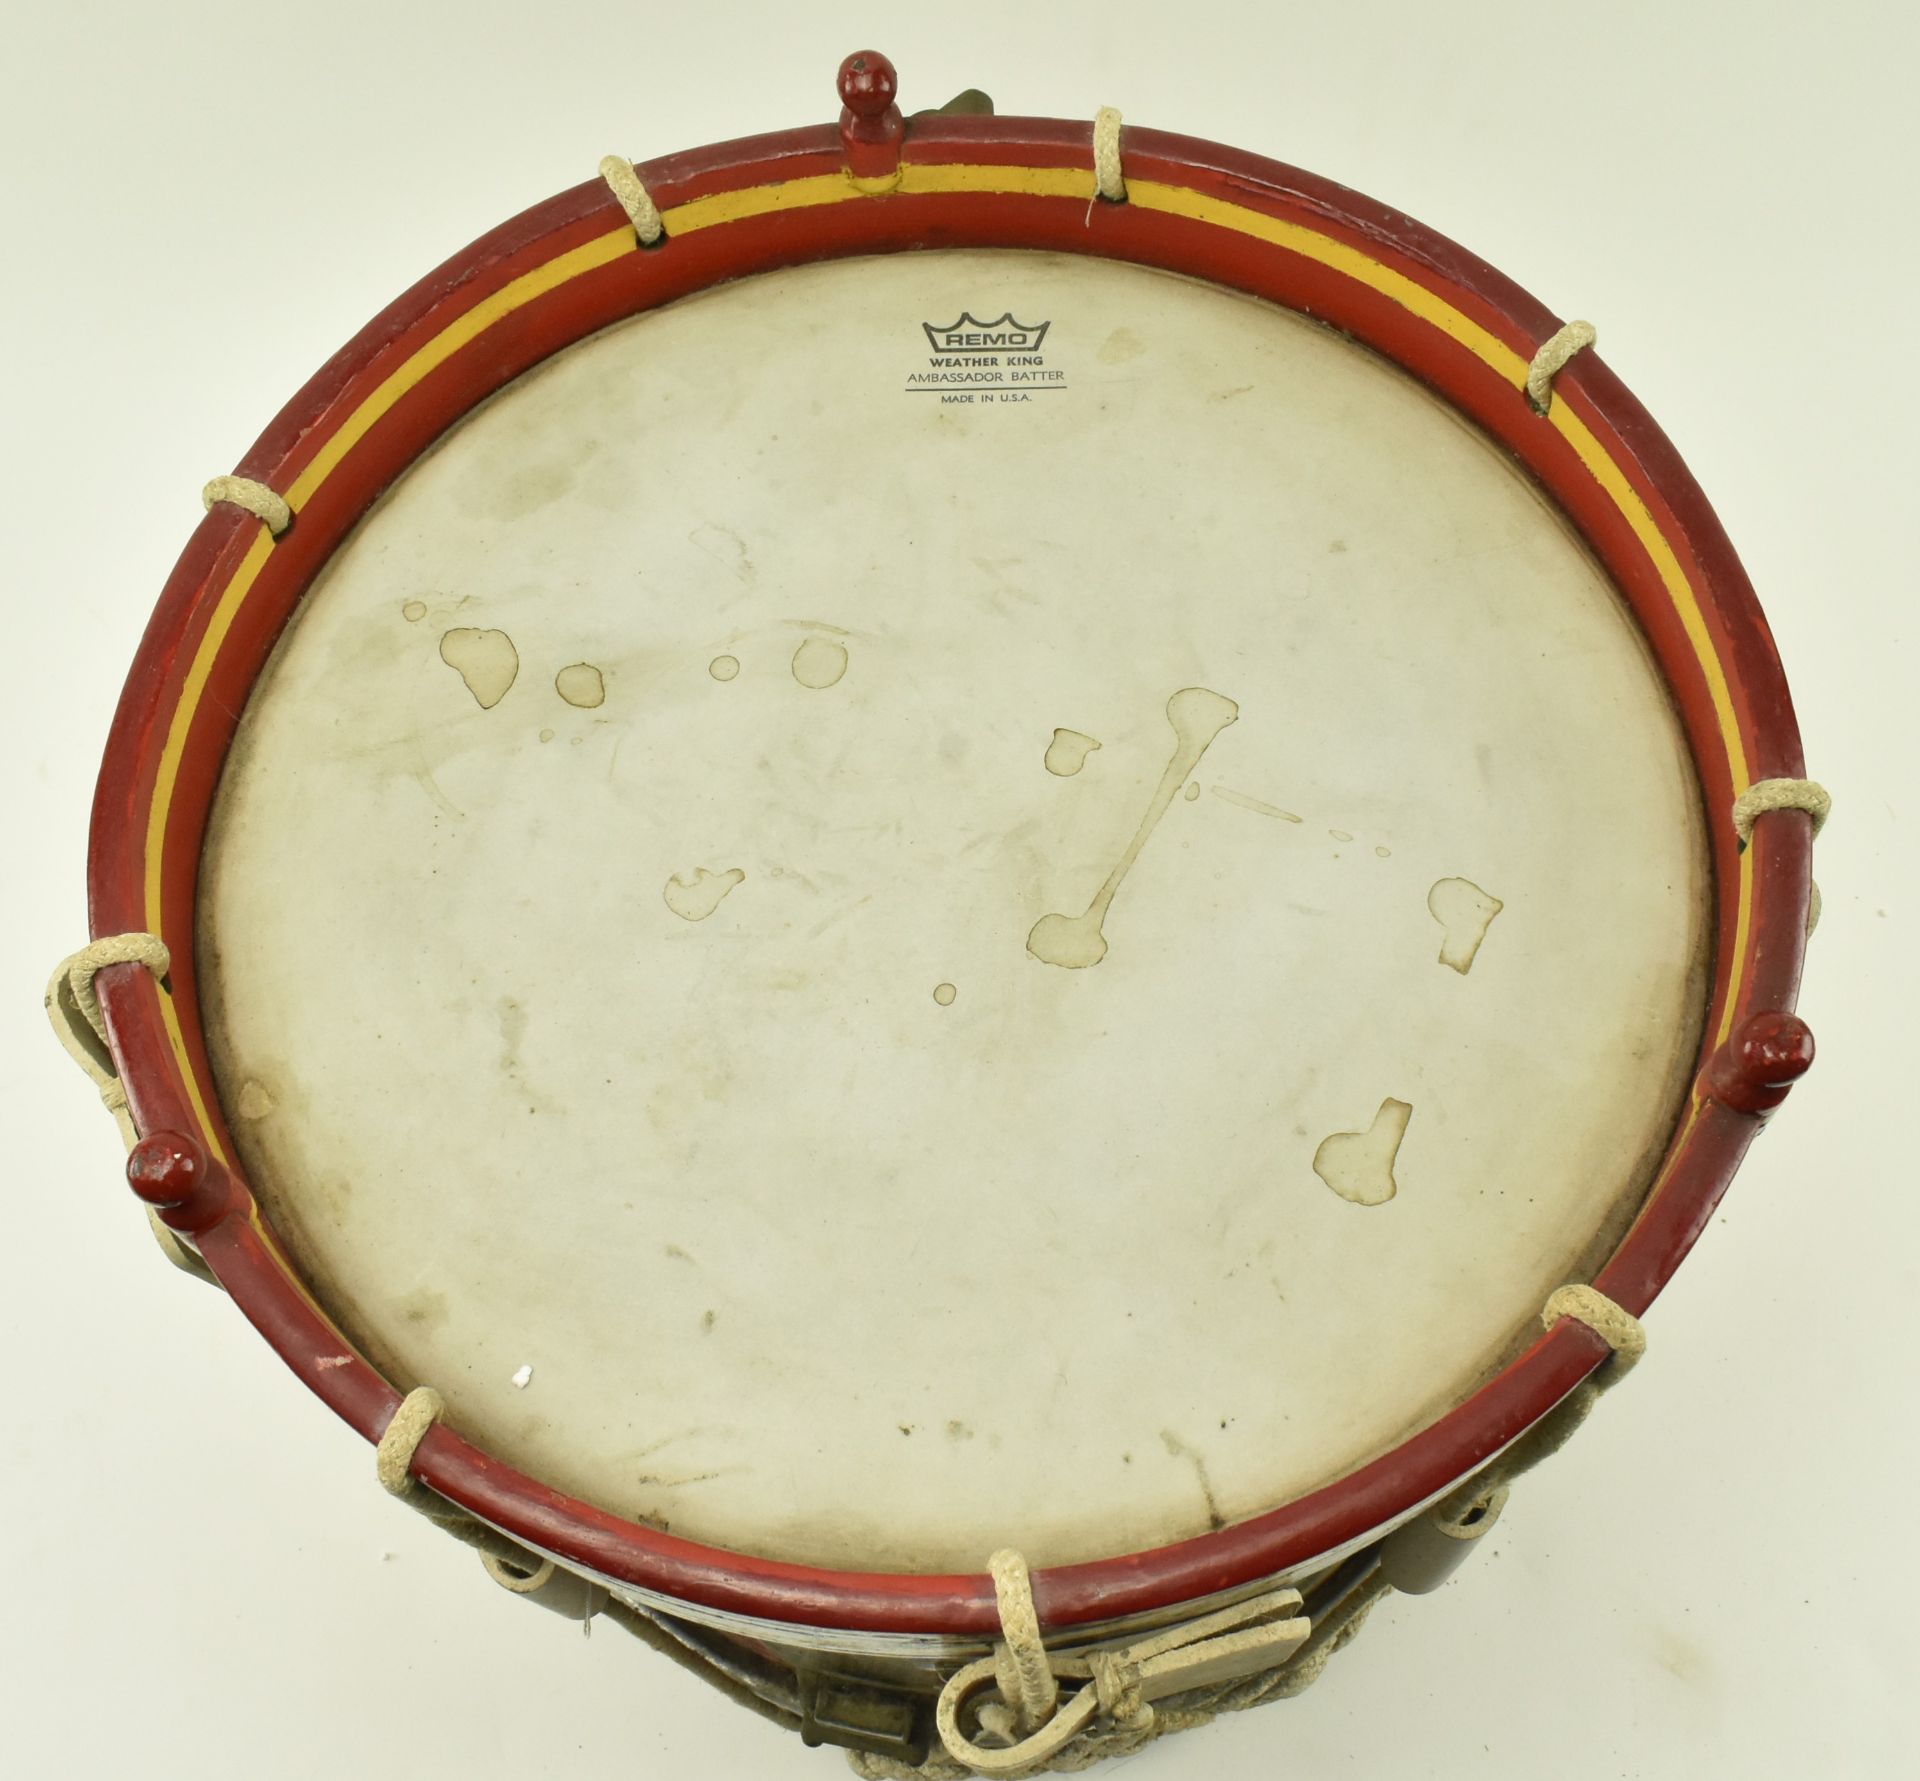 20TH CENTURY BRITISH MILITARY COAT OF ARMS SIDE DRUM BY PREMIER - Image 6 of 7